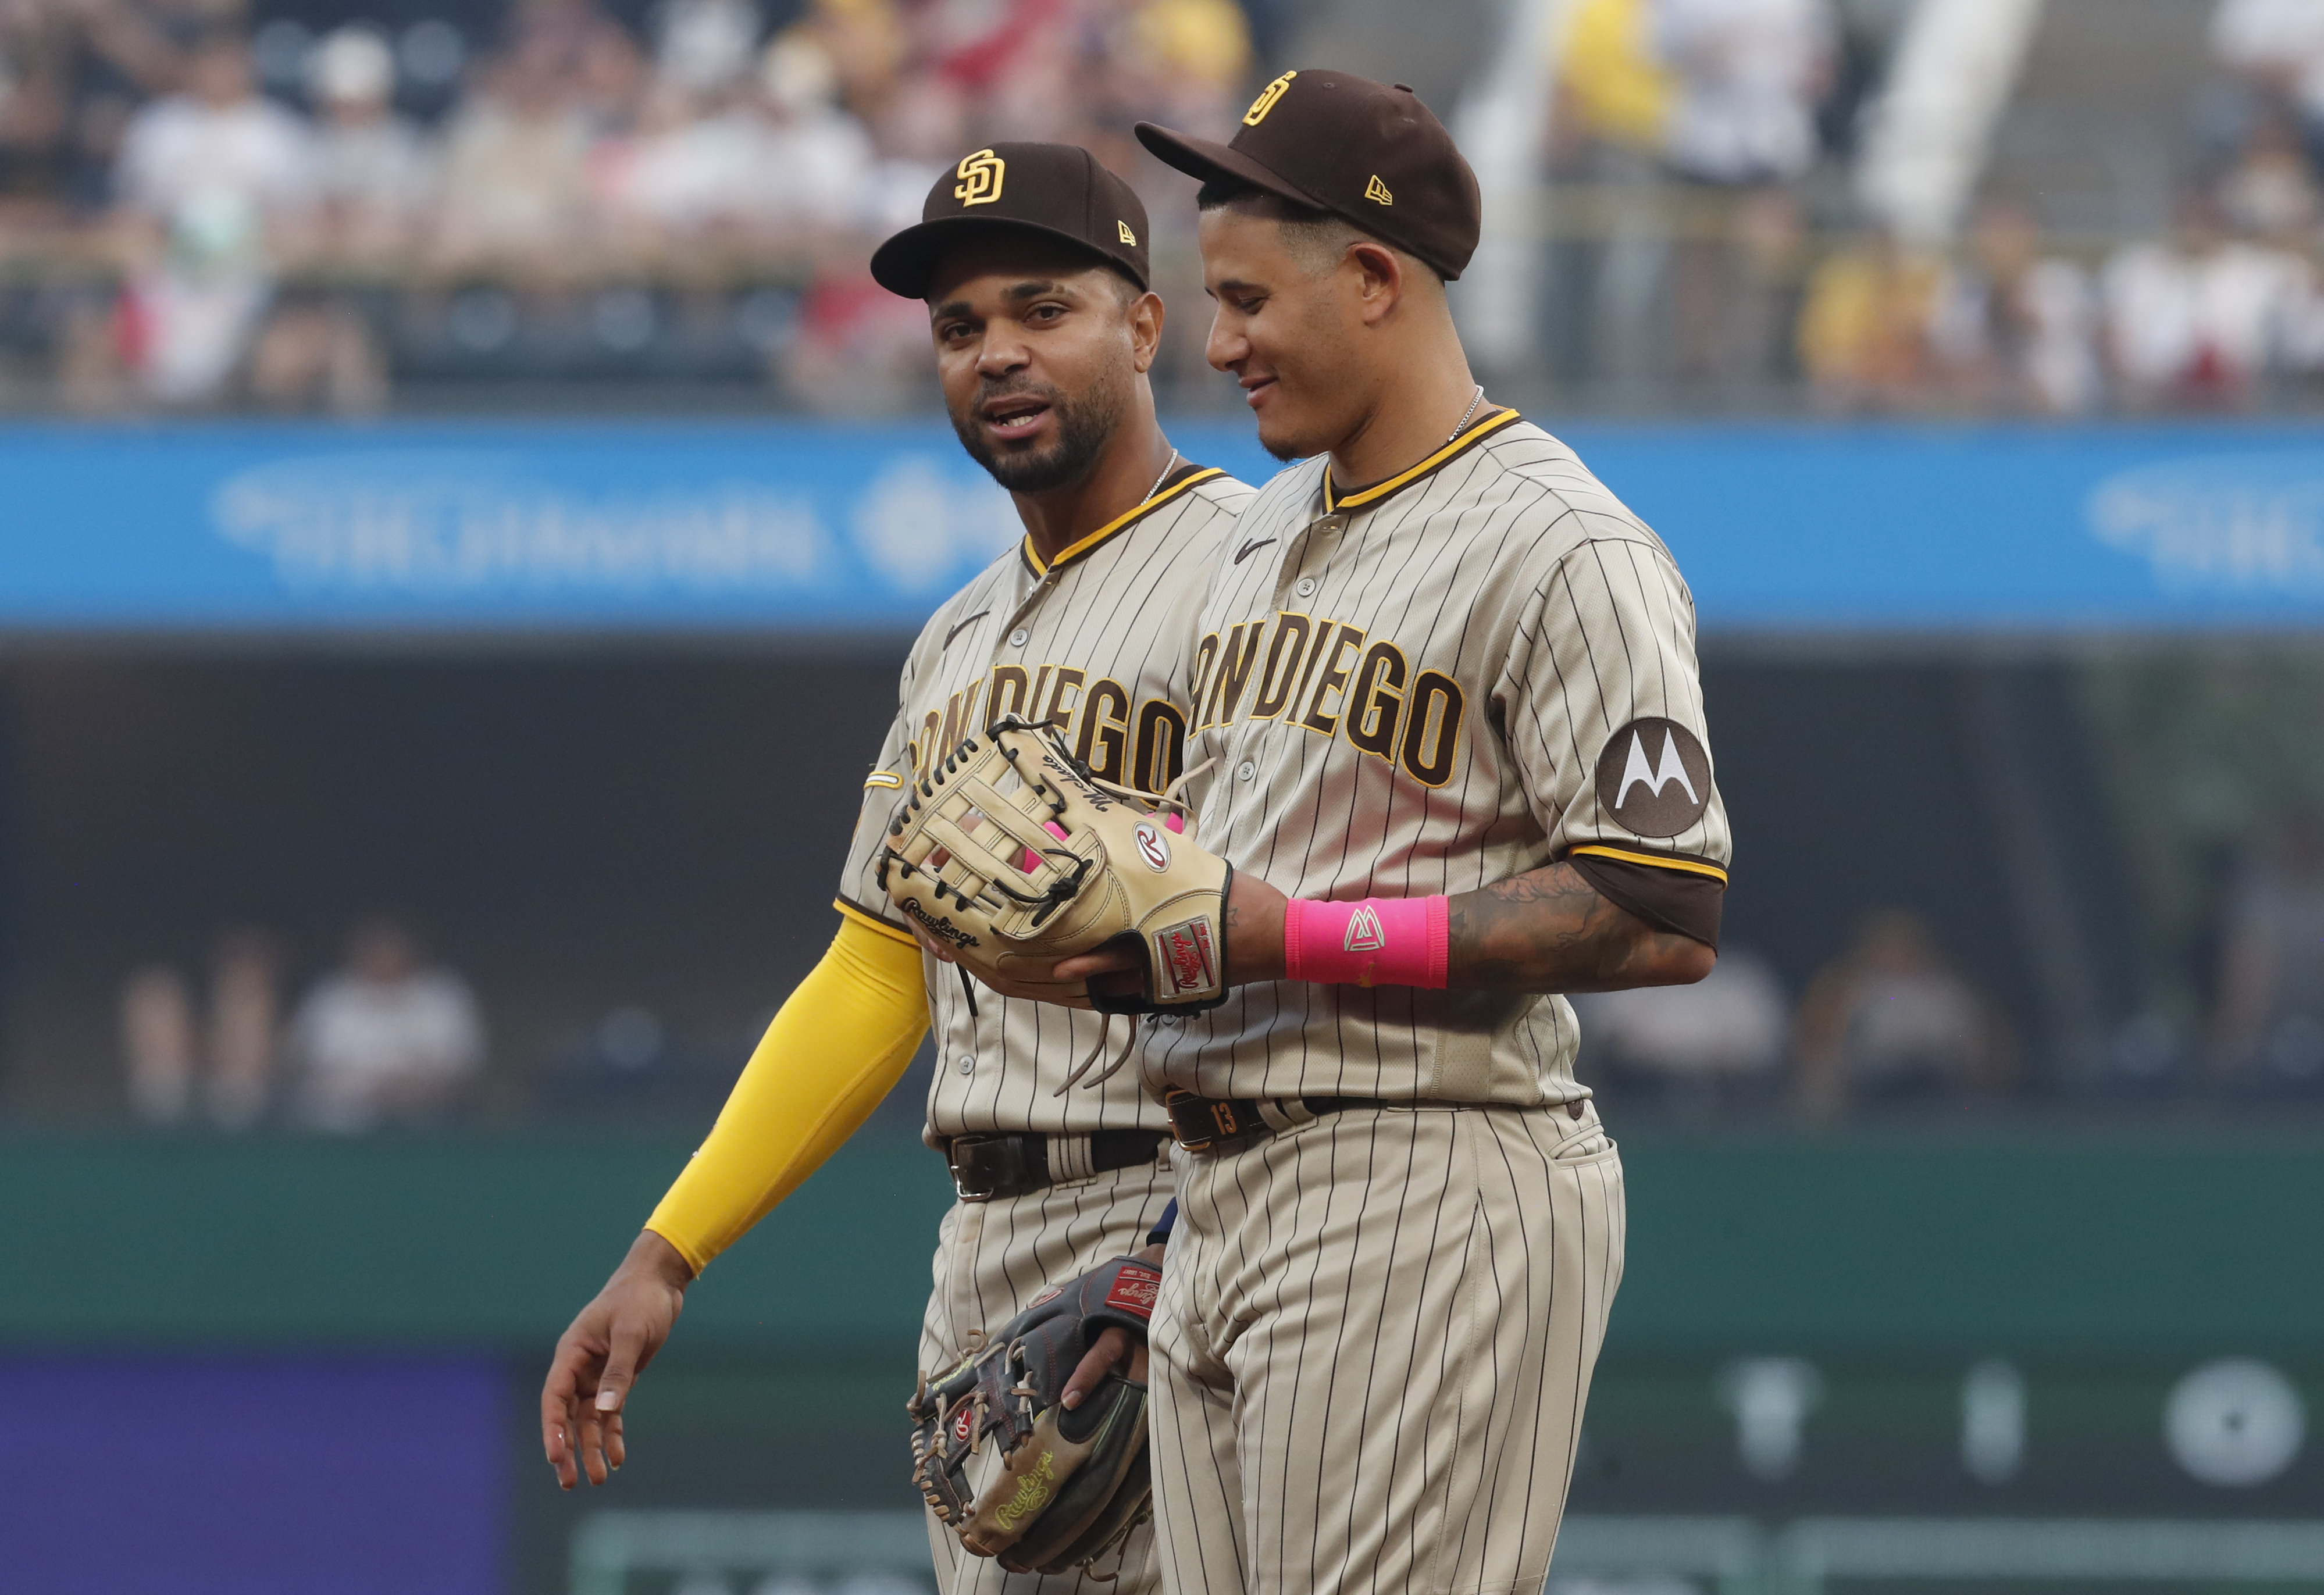 Five-run inning gives Pirates another win over Padres